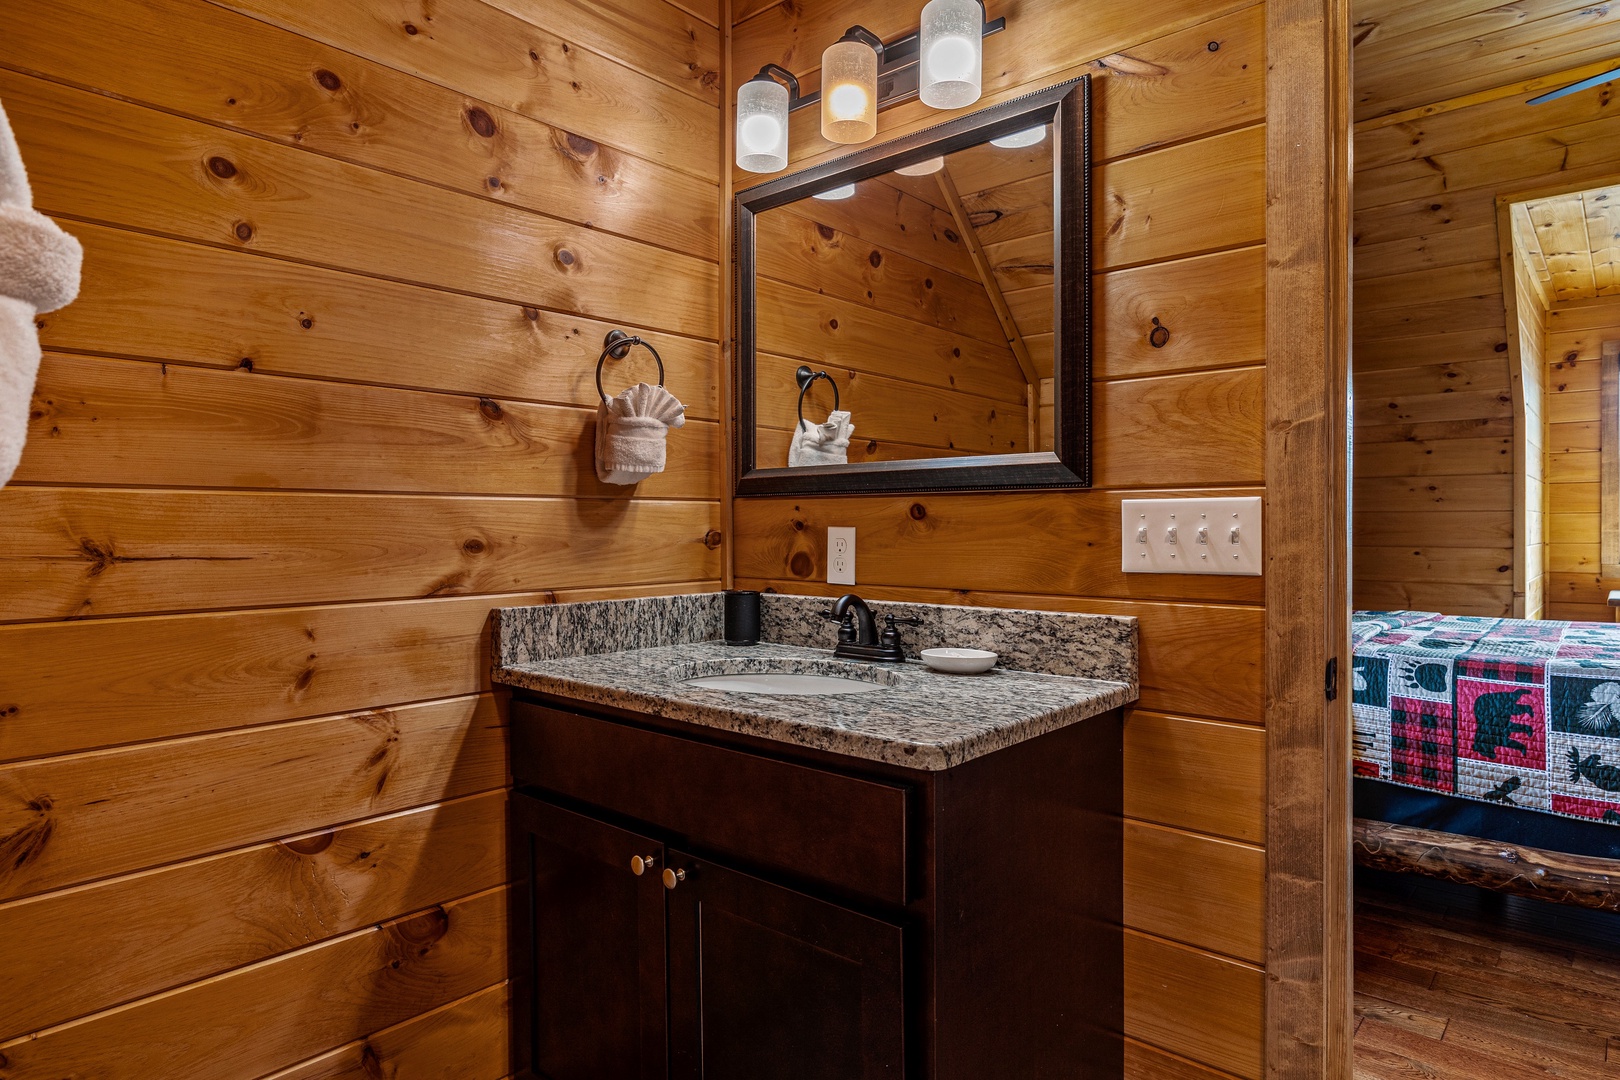 Loft bathroom sink and lighting at Four Seasons Grand, a 5 bedroom cabin rental located in Pigeon Forge